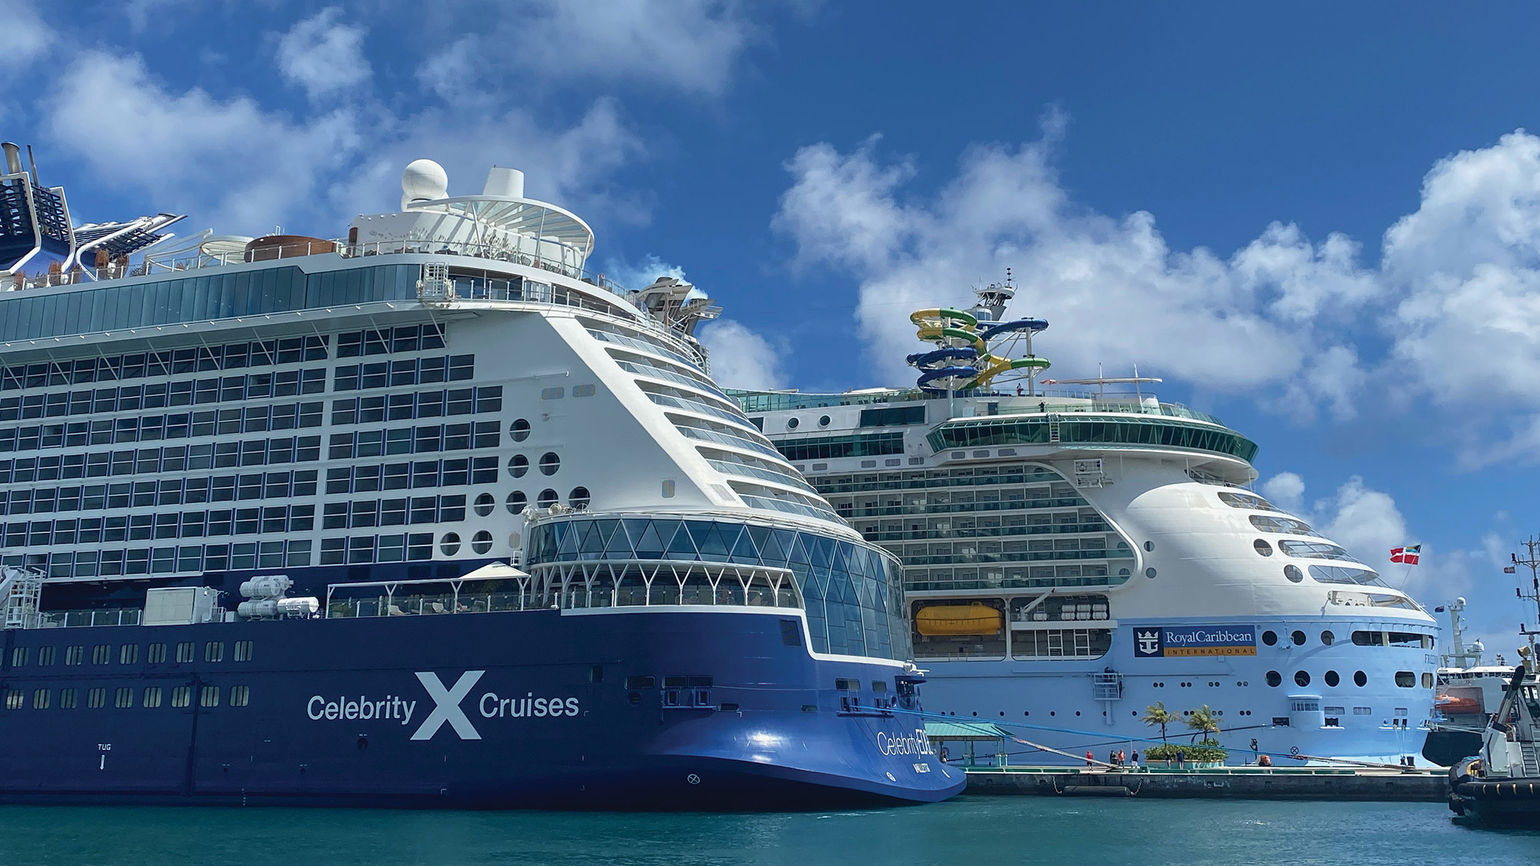 Celebrity Cruises will require Covid-19 vaccination for kids 5 and older